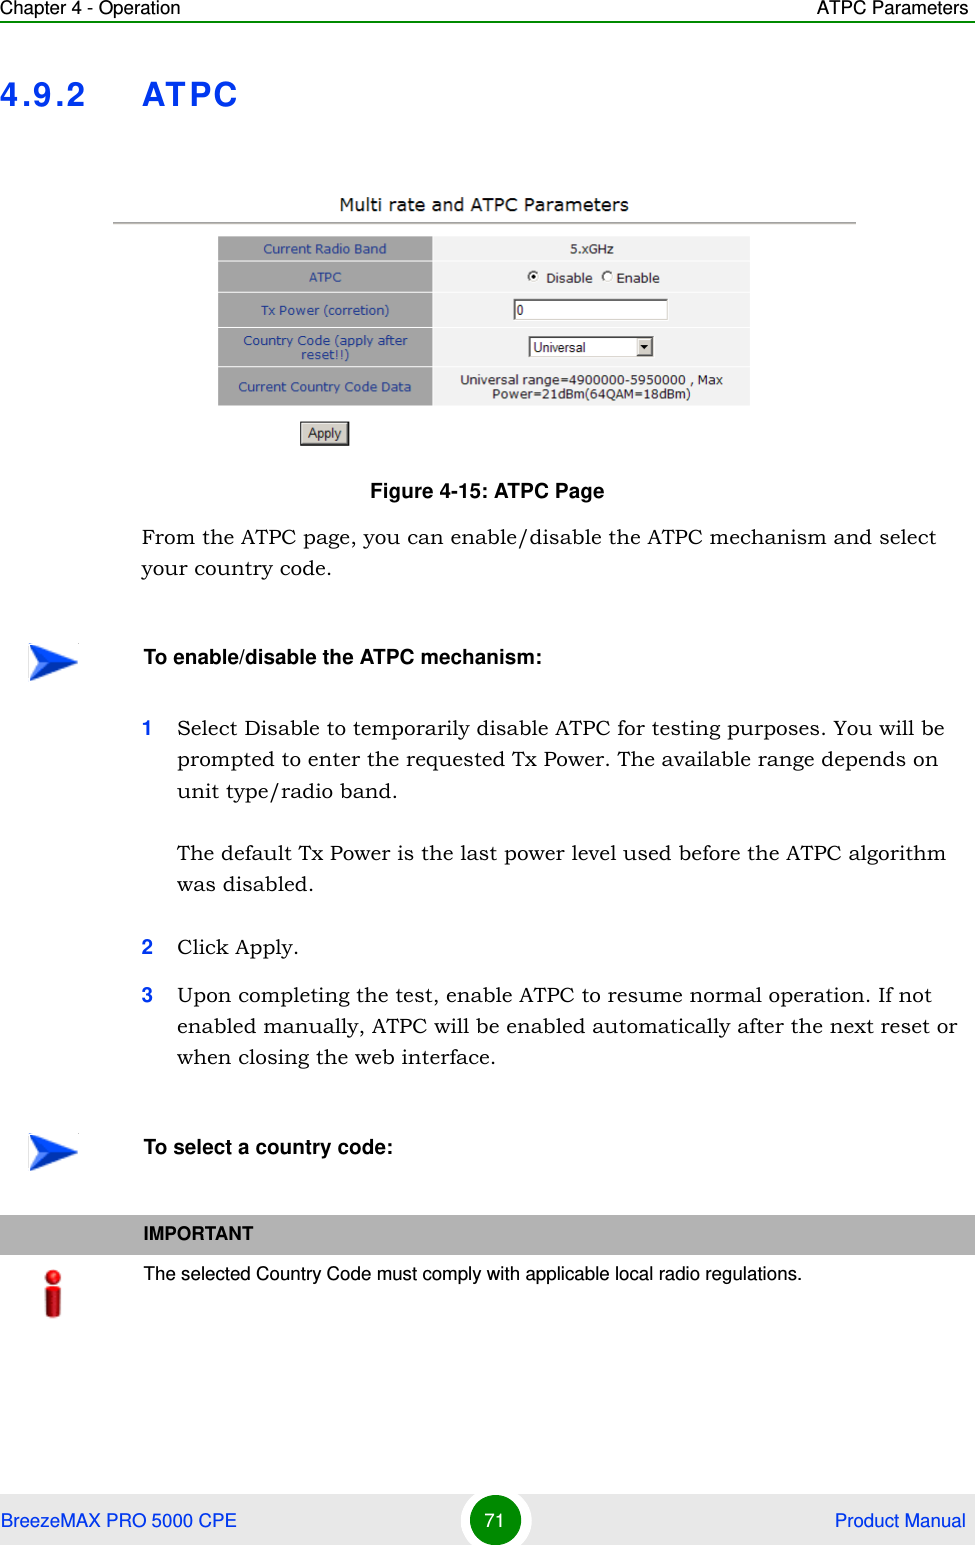 Chapter 4 - Operation ATPC ParametersBreezeMAX PRO 5000 CPE 71  Product Manual4.9.2 ATPCFrom the ATPC page, you can enable/disable the ATPC mechanism and select your country code.1Select Disable to temporarily disable ATPC for testing purposes. You will be prompted to enter the requested Tx Power. The available range depends on unit type/radio band.The default Tx Power is the last power level used before the ATPC algorithm was disabled.2Click Apply.3Upon completing the test, enable ATPC to resume normal operation. If not enabled manually, ATPC will be enabled automatically after the next reset or when closing the web interface.Figure 4-15: ATPC PageTo enable/disable the ATPC mechanism:To select a country code:IMPORTANTThe selected Country Code must comply with applicable local radio regulations.